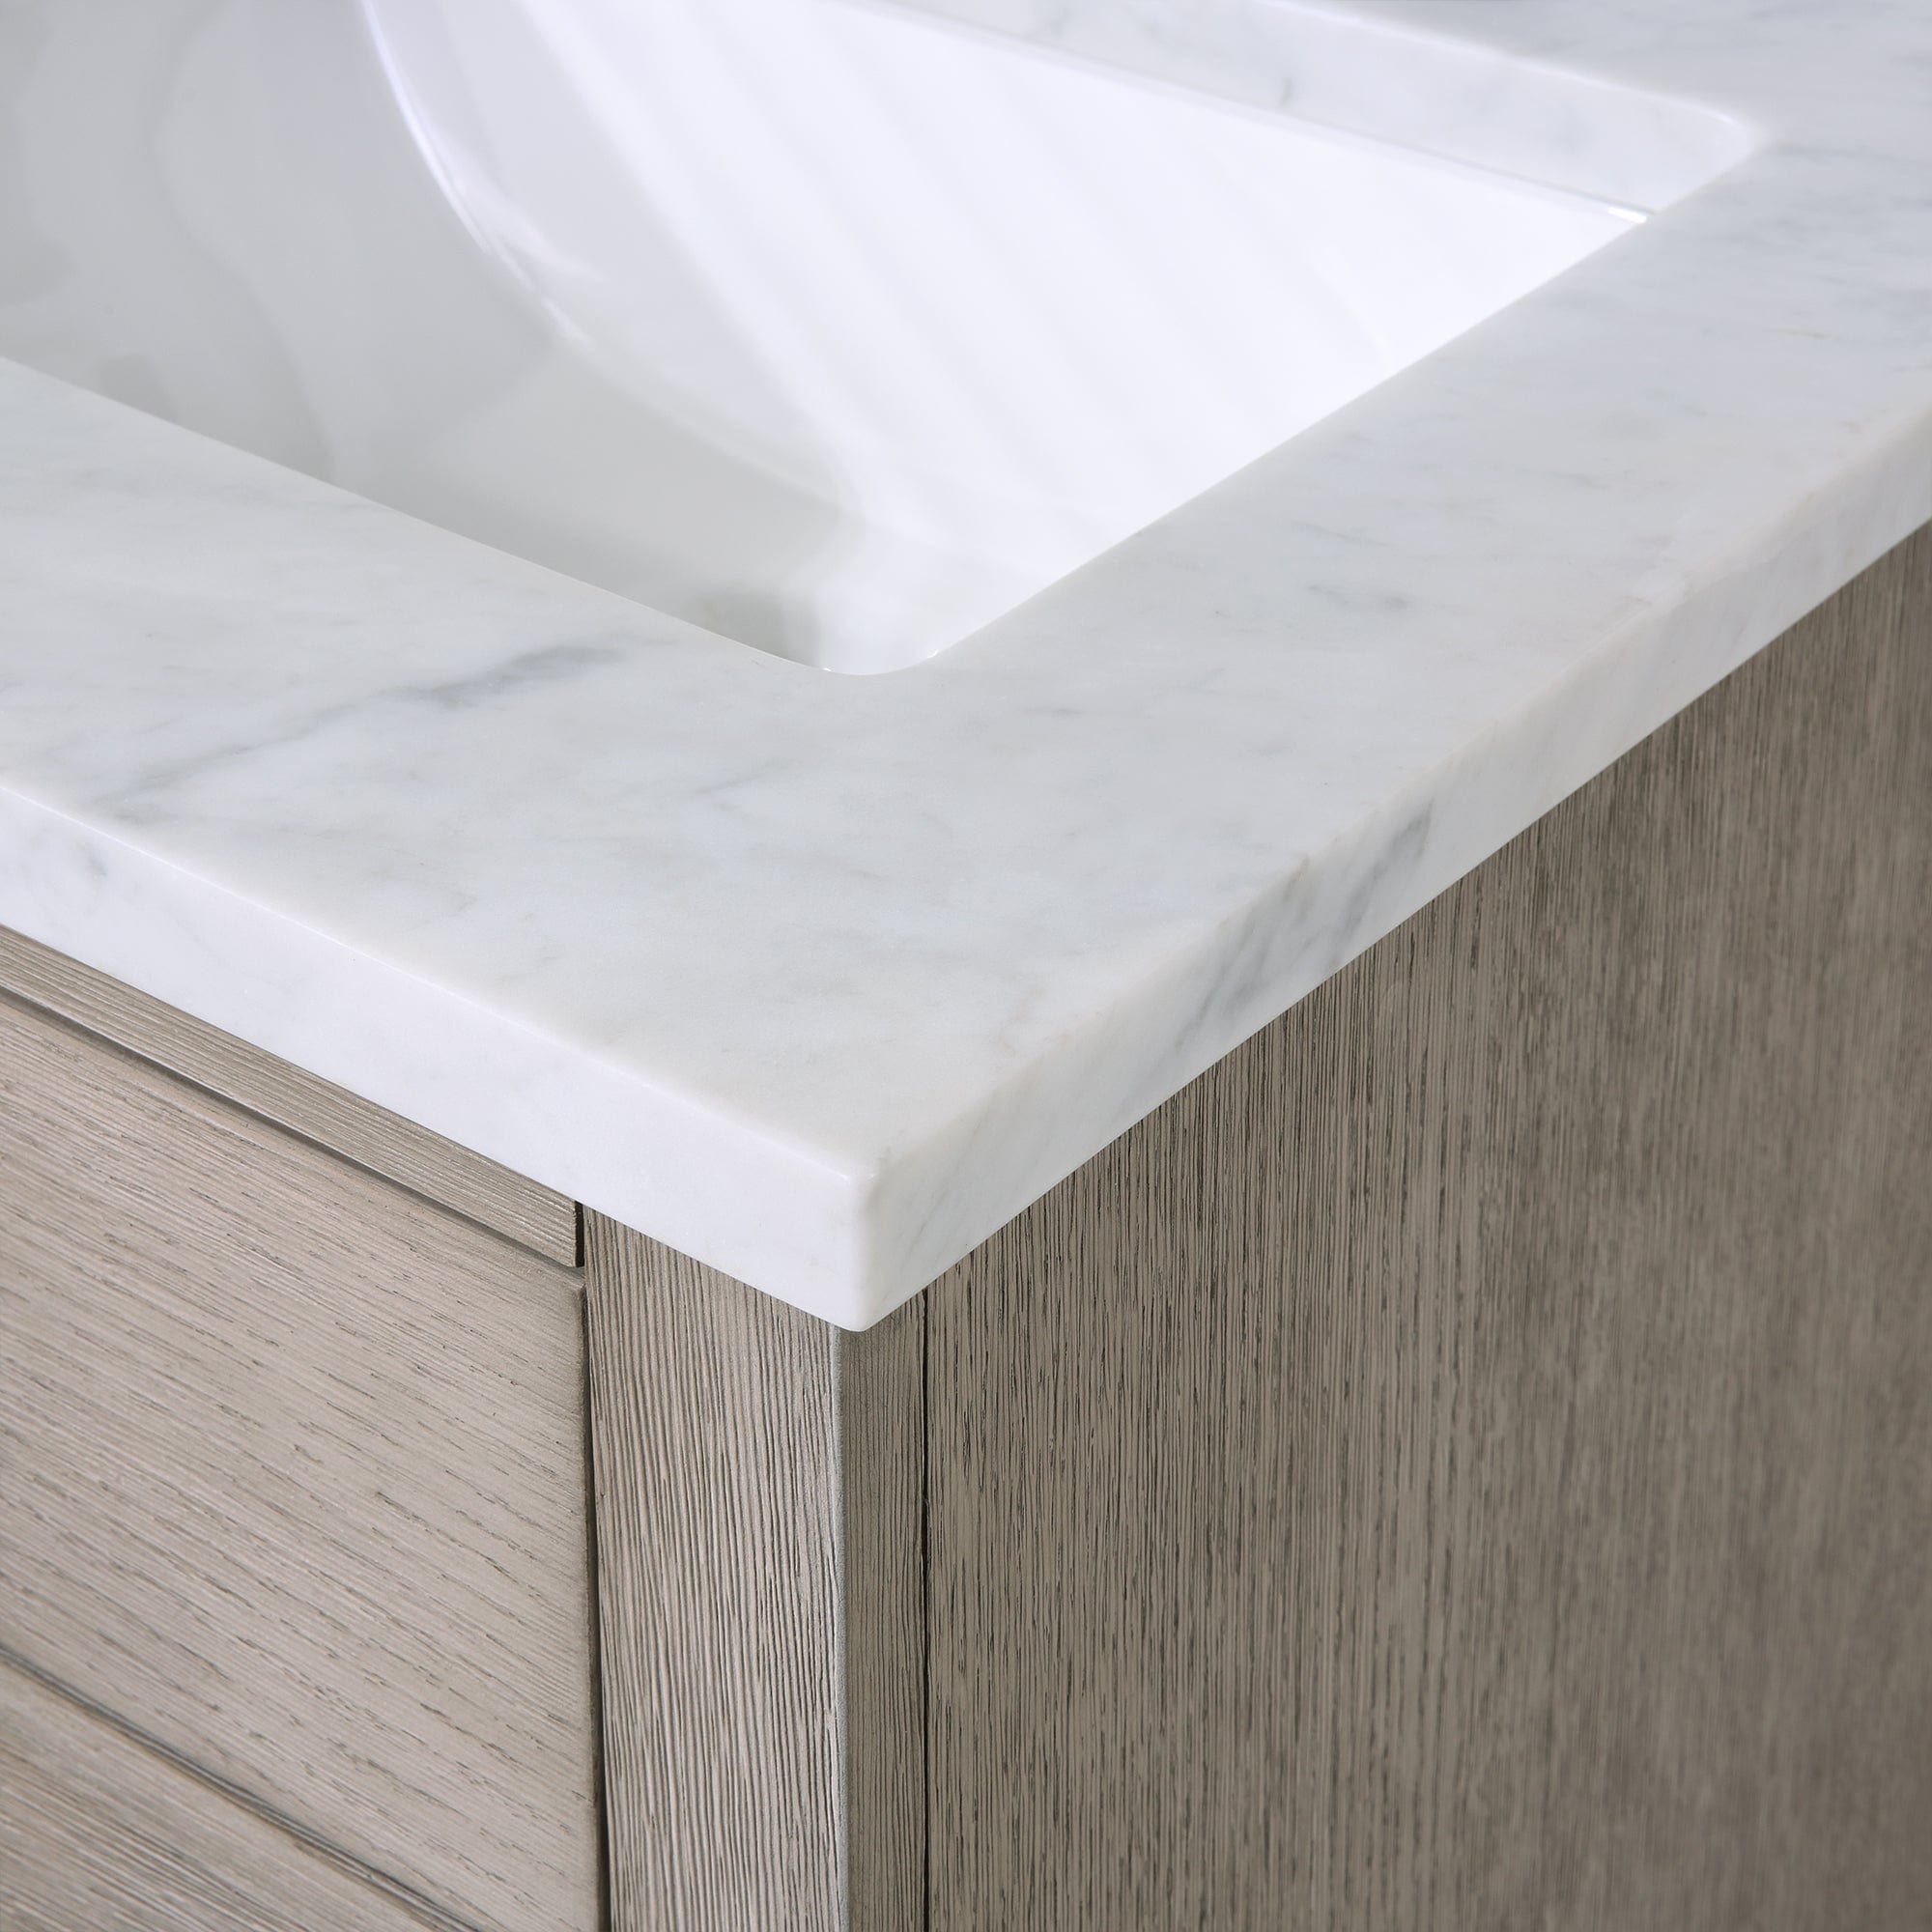 Chestnut 24 In. Single Sink Carrara White Marble Countertop Vanity In Grey Oak with Grooseneck Faucet and Mirror - Molaix732030764590CH24CW03GK-R21BL1403